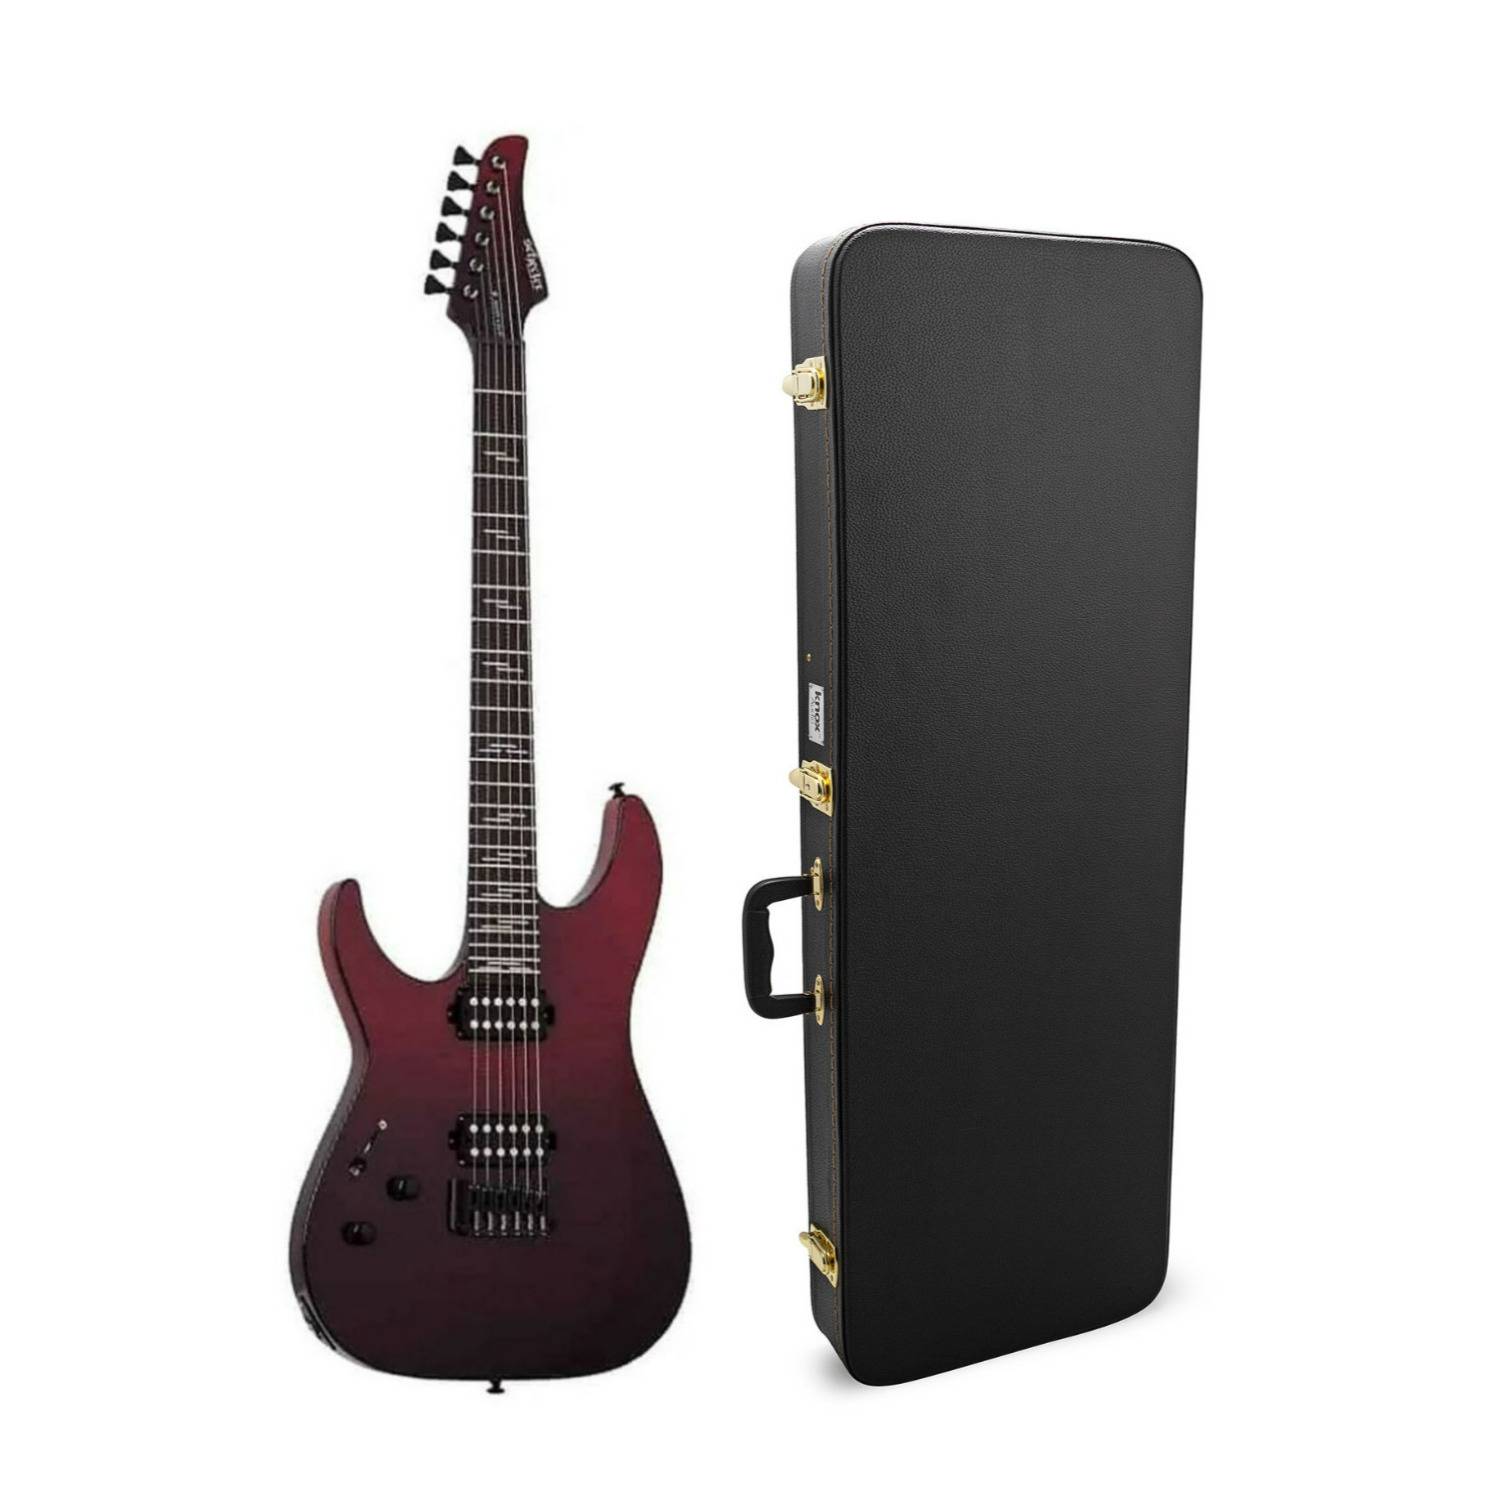 Schecter Reaper-6 Elite LH 6-String Electric Guitar (Left Handed, Blood Burst) with Carrying Case